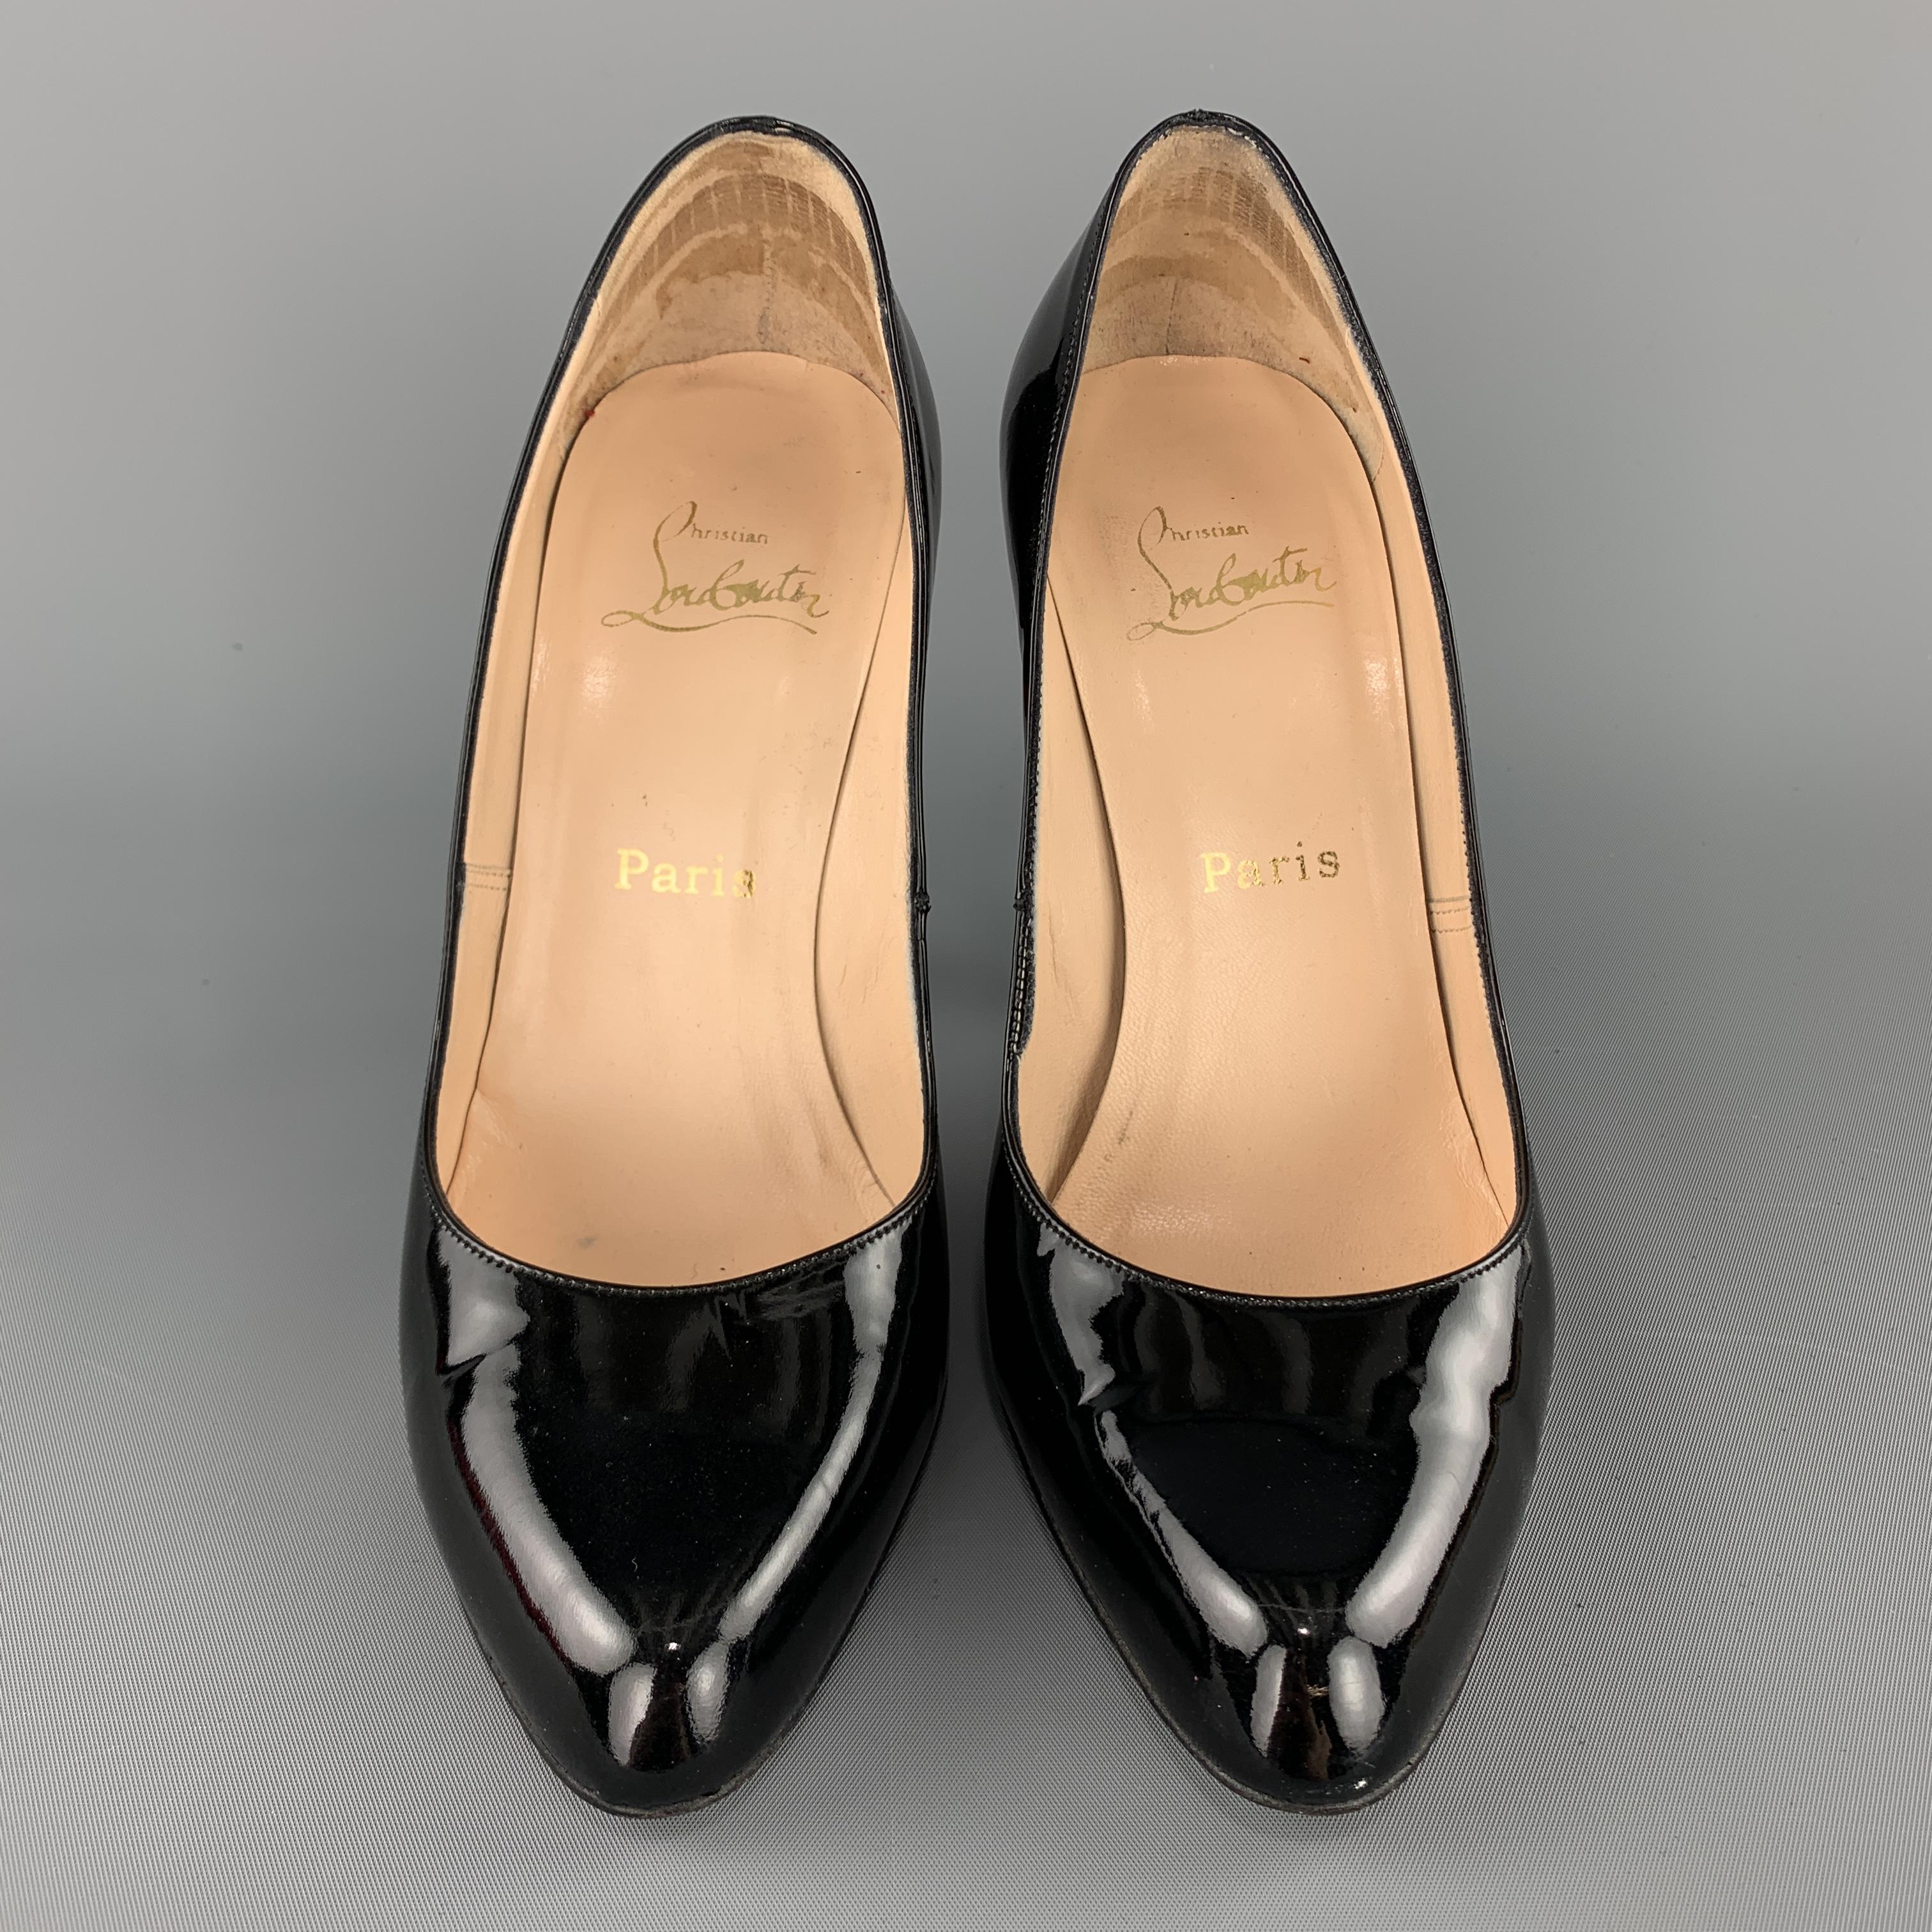 CHRISTIAN LOUBOUTIN classic pumps come in glossy patent leather with a subtle pointed toe and covered stiletto heel. Made in Italy.

Very Good Pre-Owned Condition.
Marked: IT 38.5

Heel: 4.45 in.